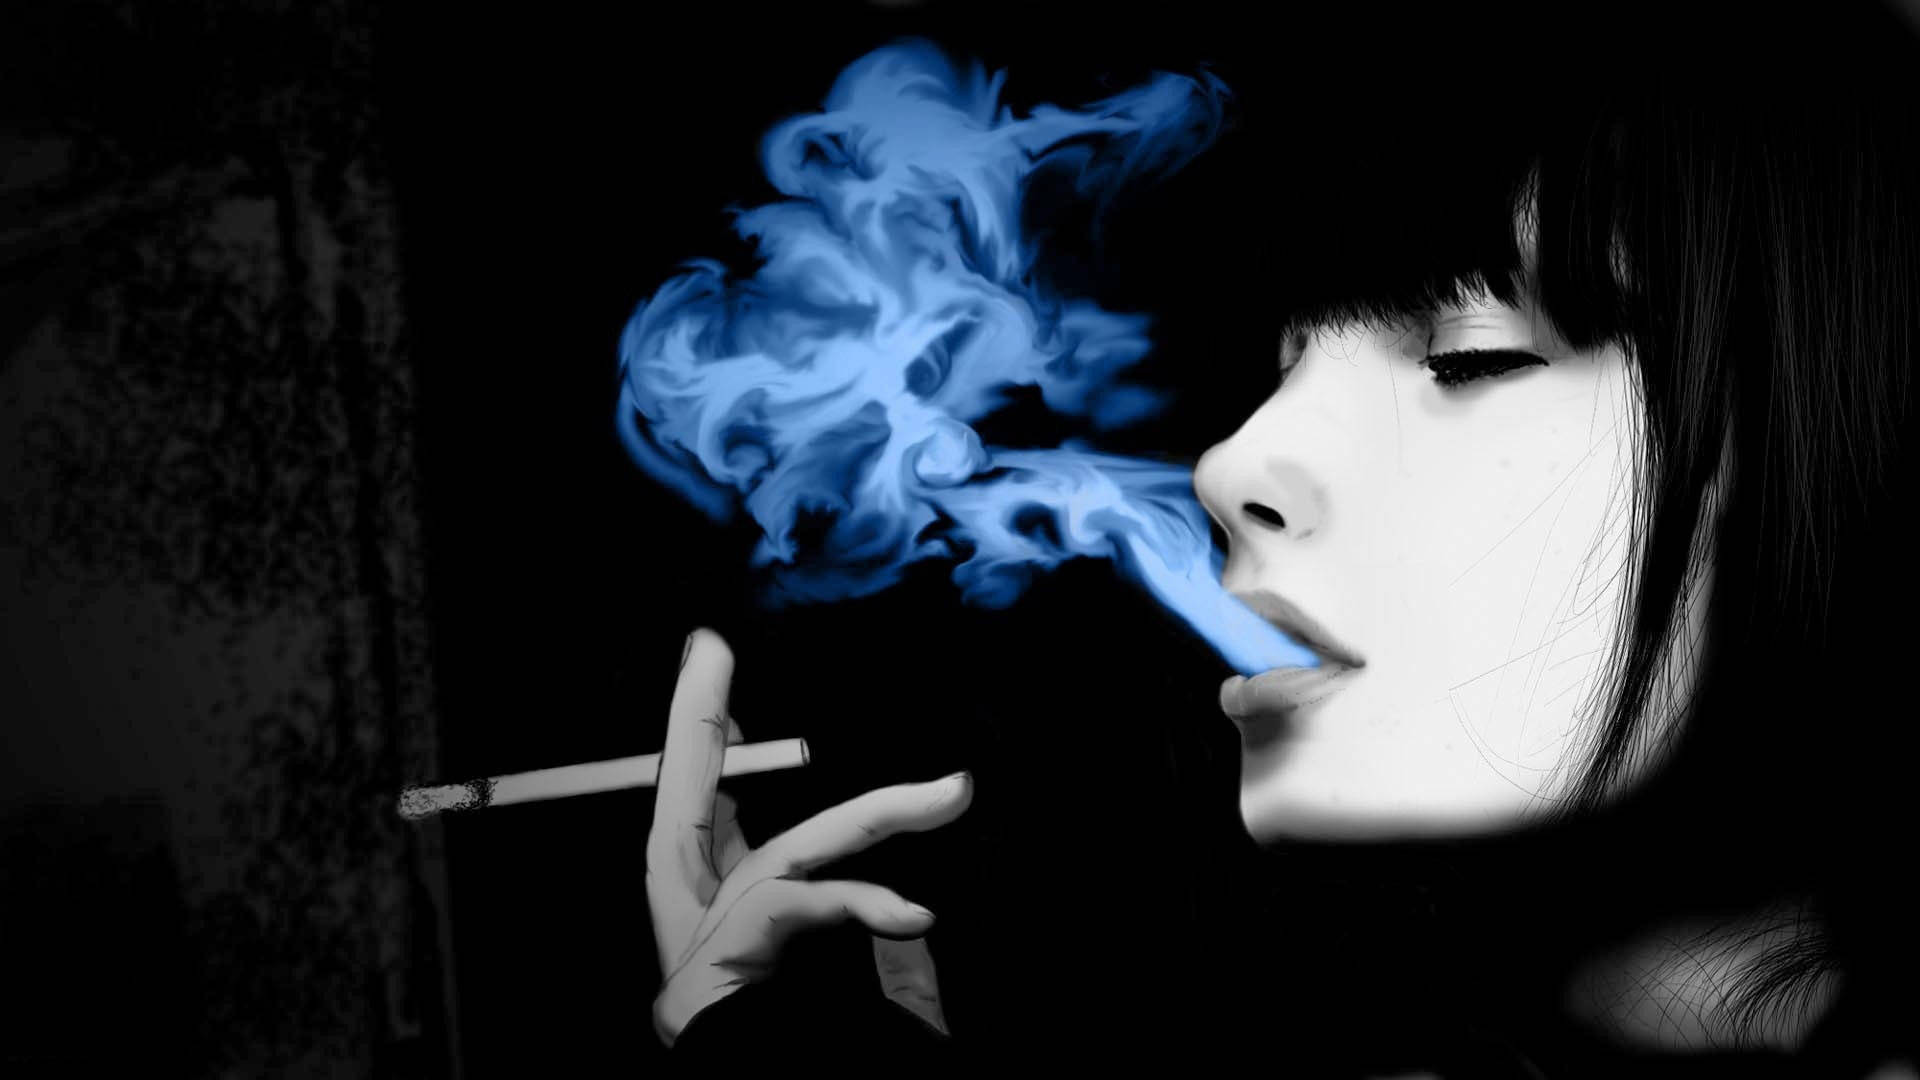 A Person's Hand Holding A Lit Cigarette With Smoke Wafting Upwards.